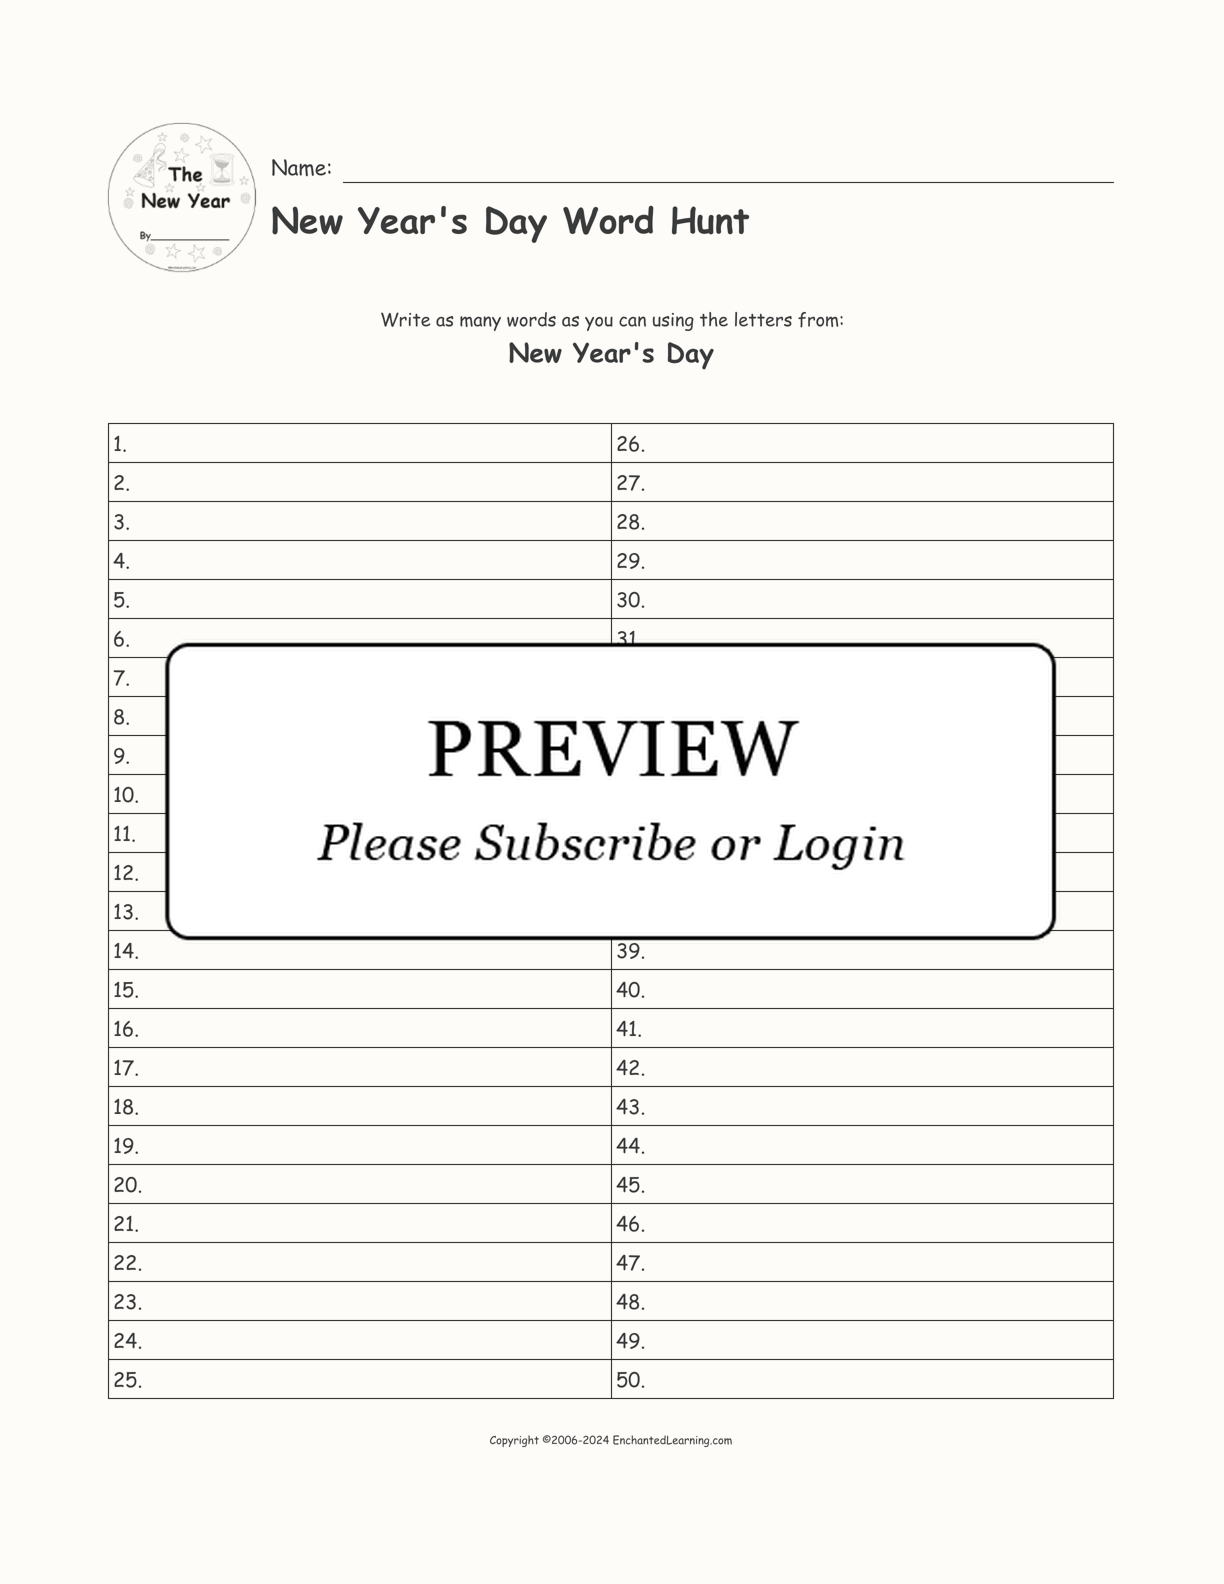 New Year's Day Word Hunt interactive worksheet page 1